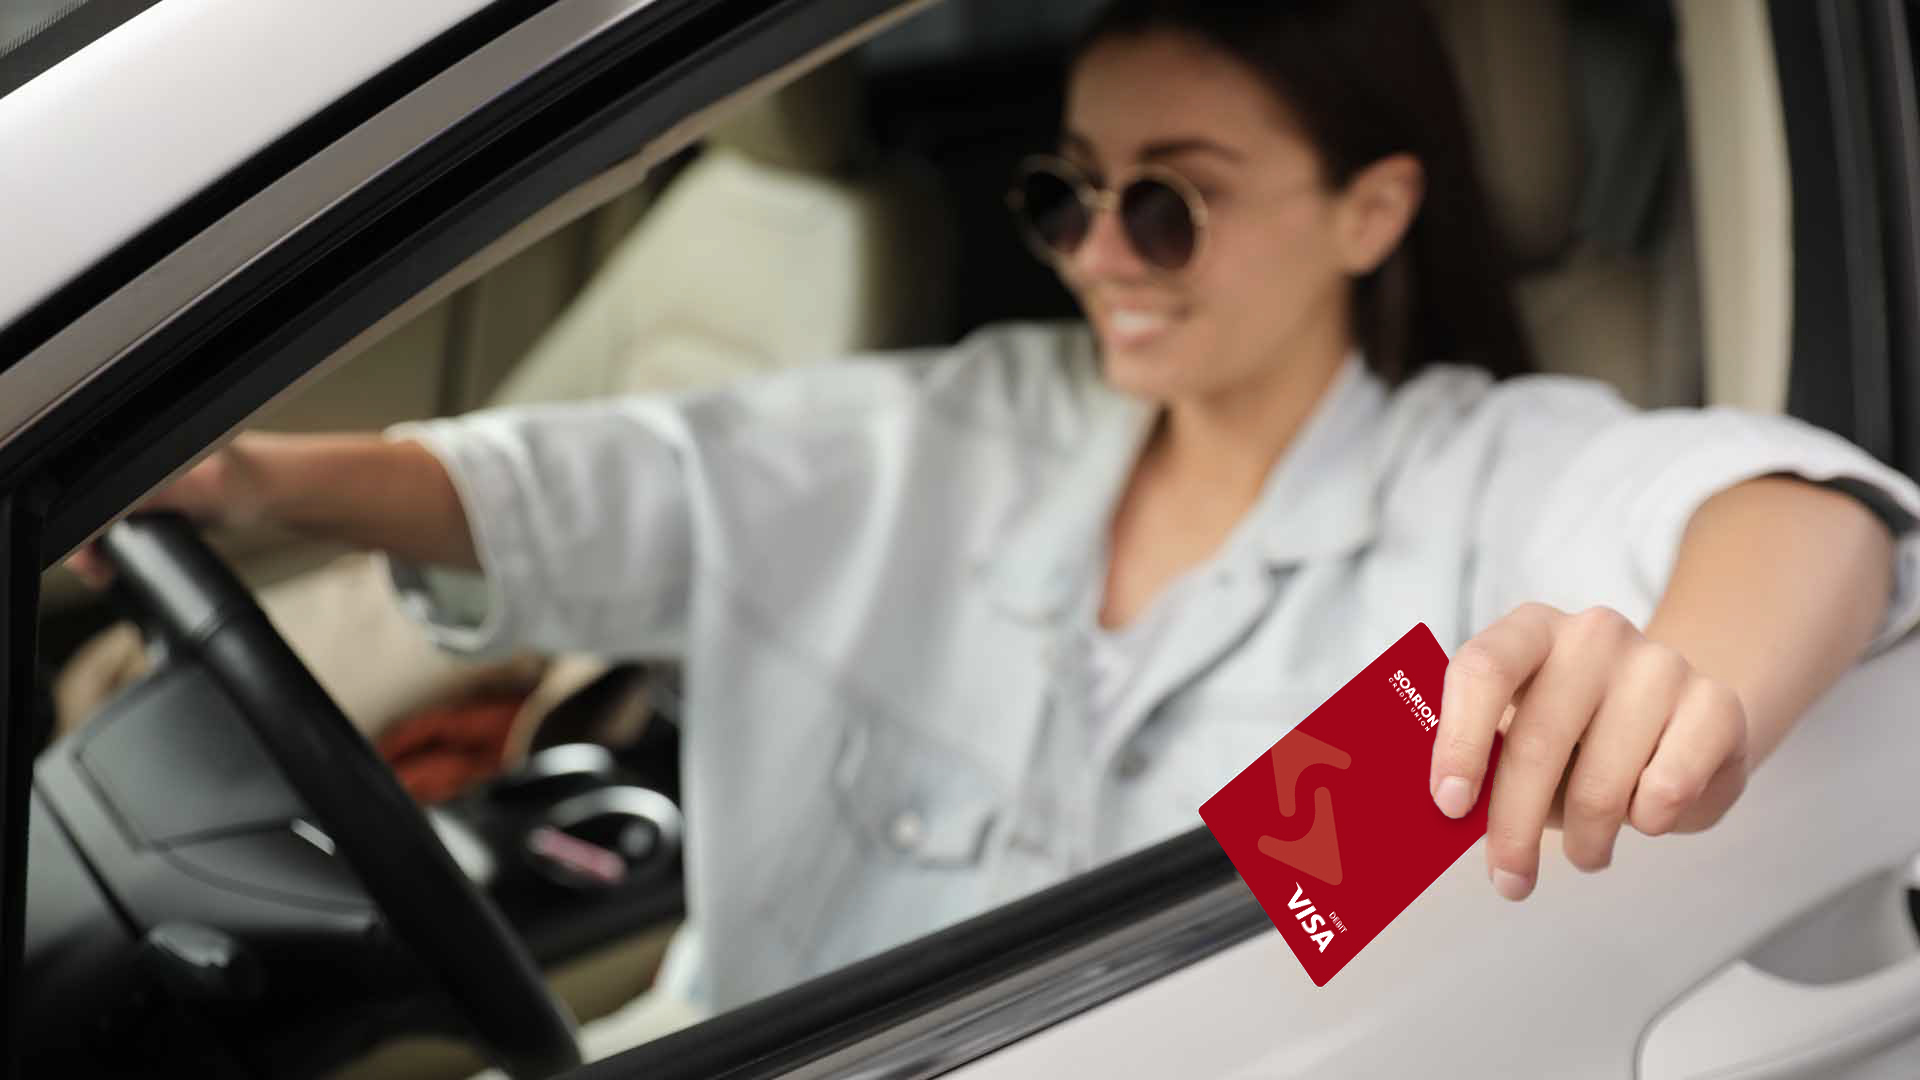 woman in driver's seat of car holding a debit card